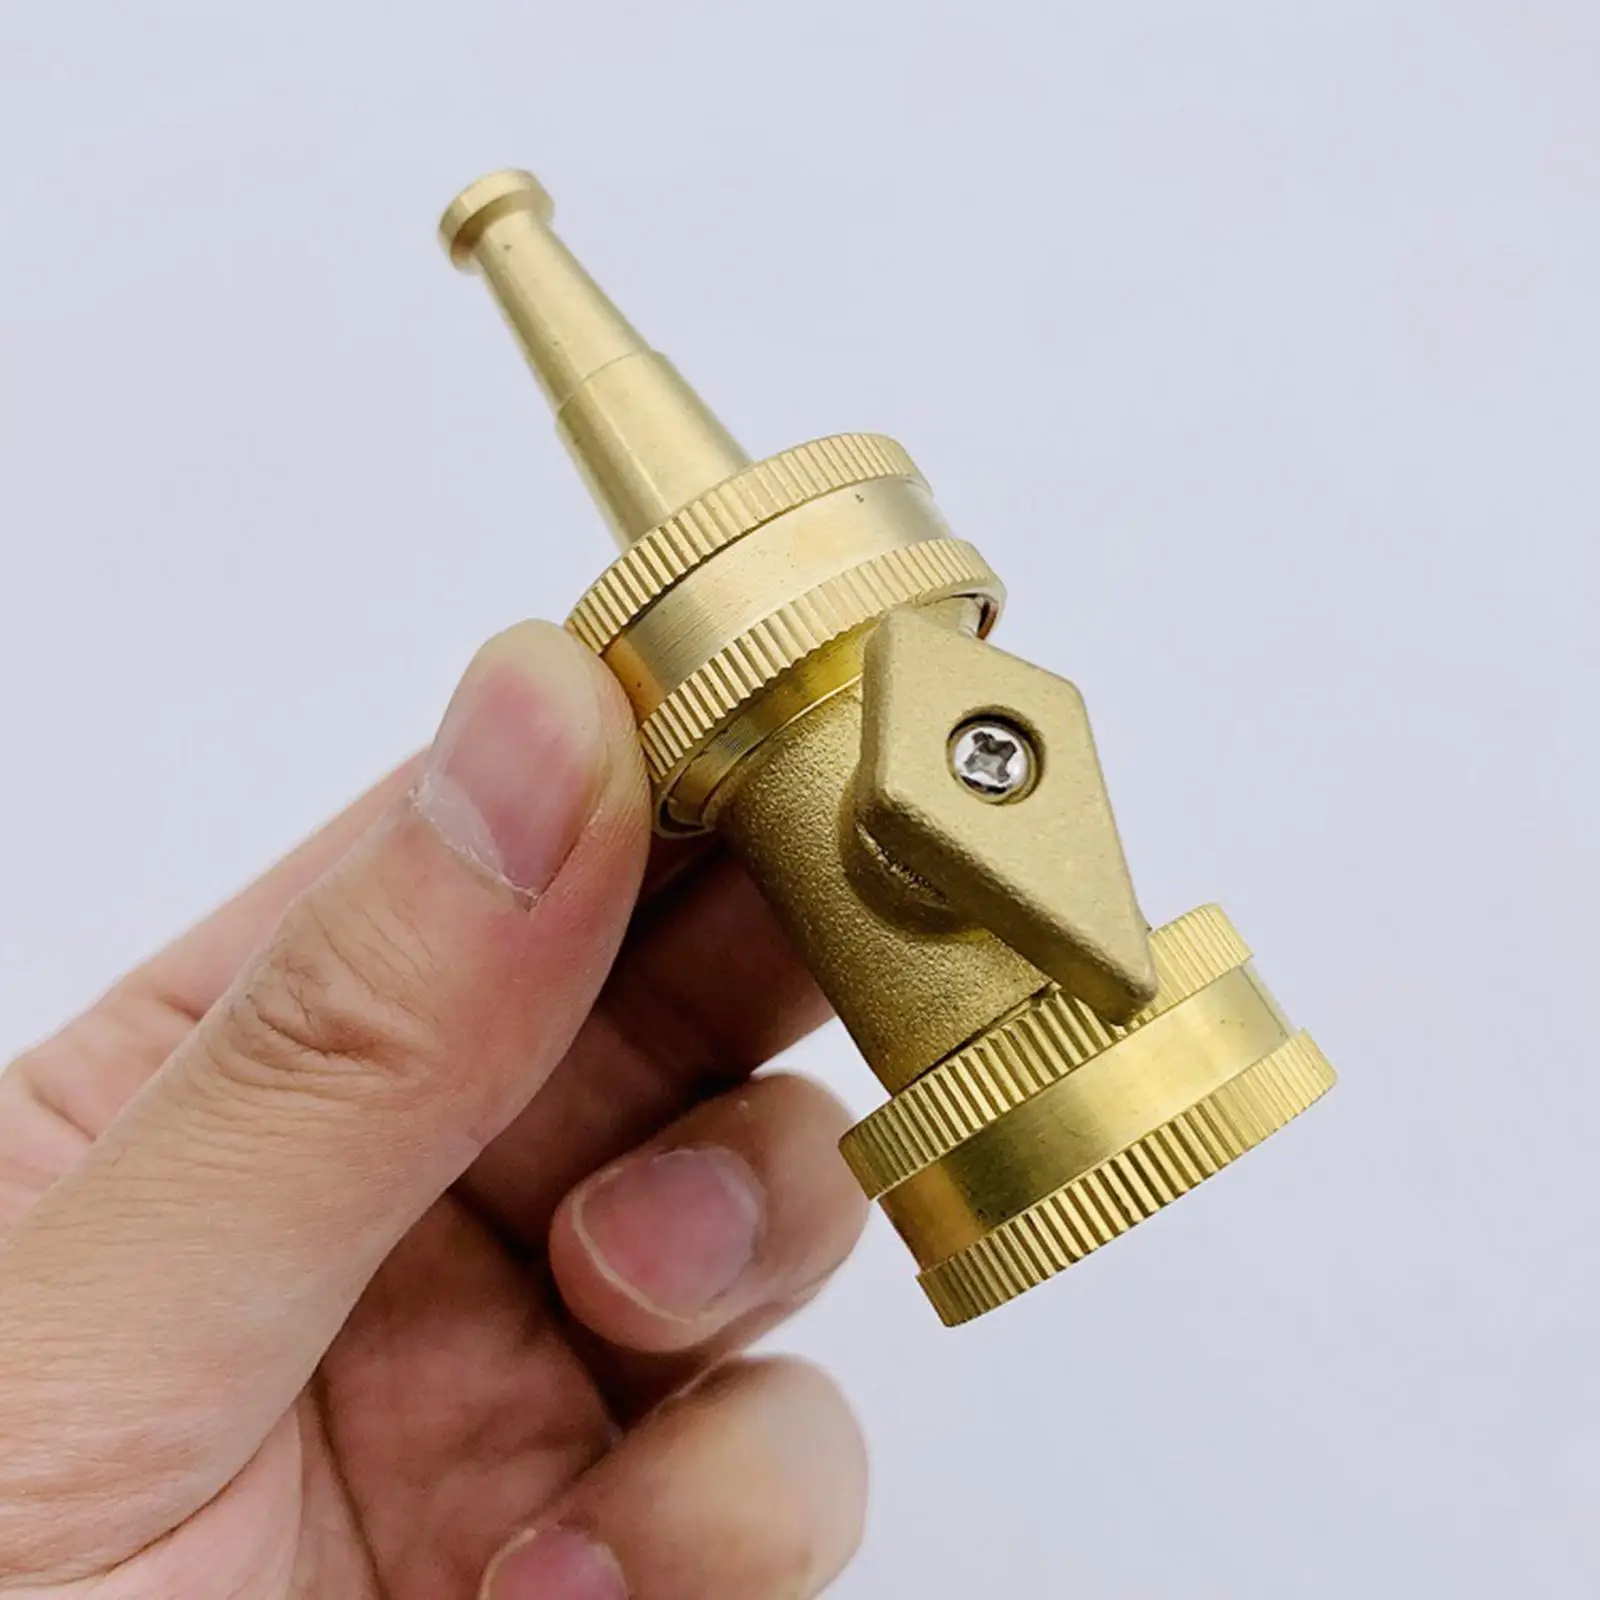 Jet Nozzle Water Hose Garden Hose Connectors and Fittings Adjustable Twist Hose Nozzle for Washing Car Watering Flowers Driveway